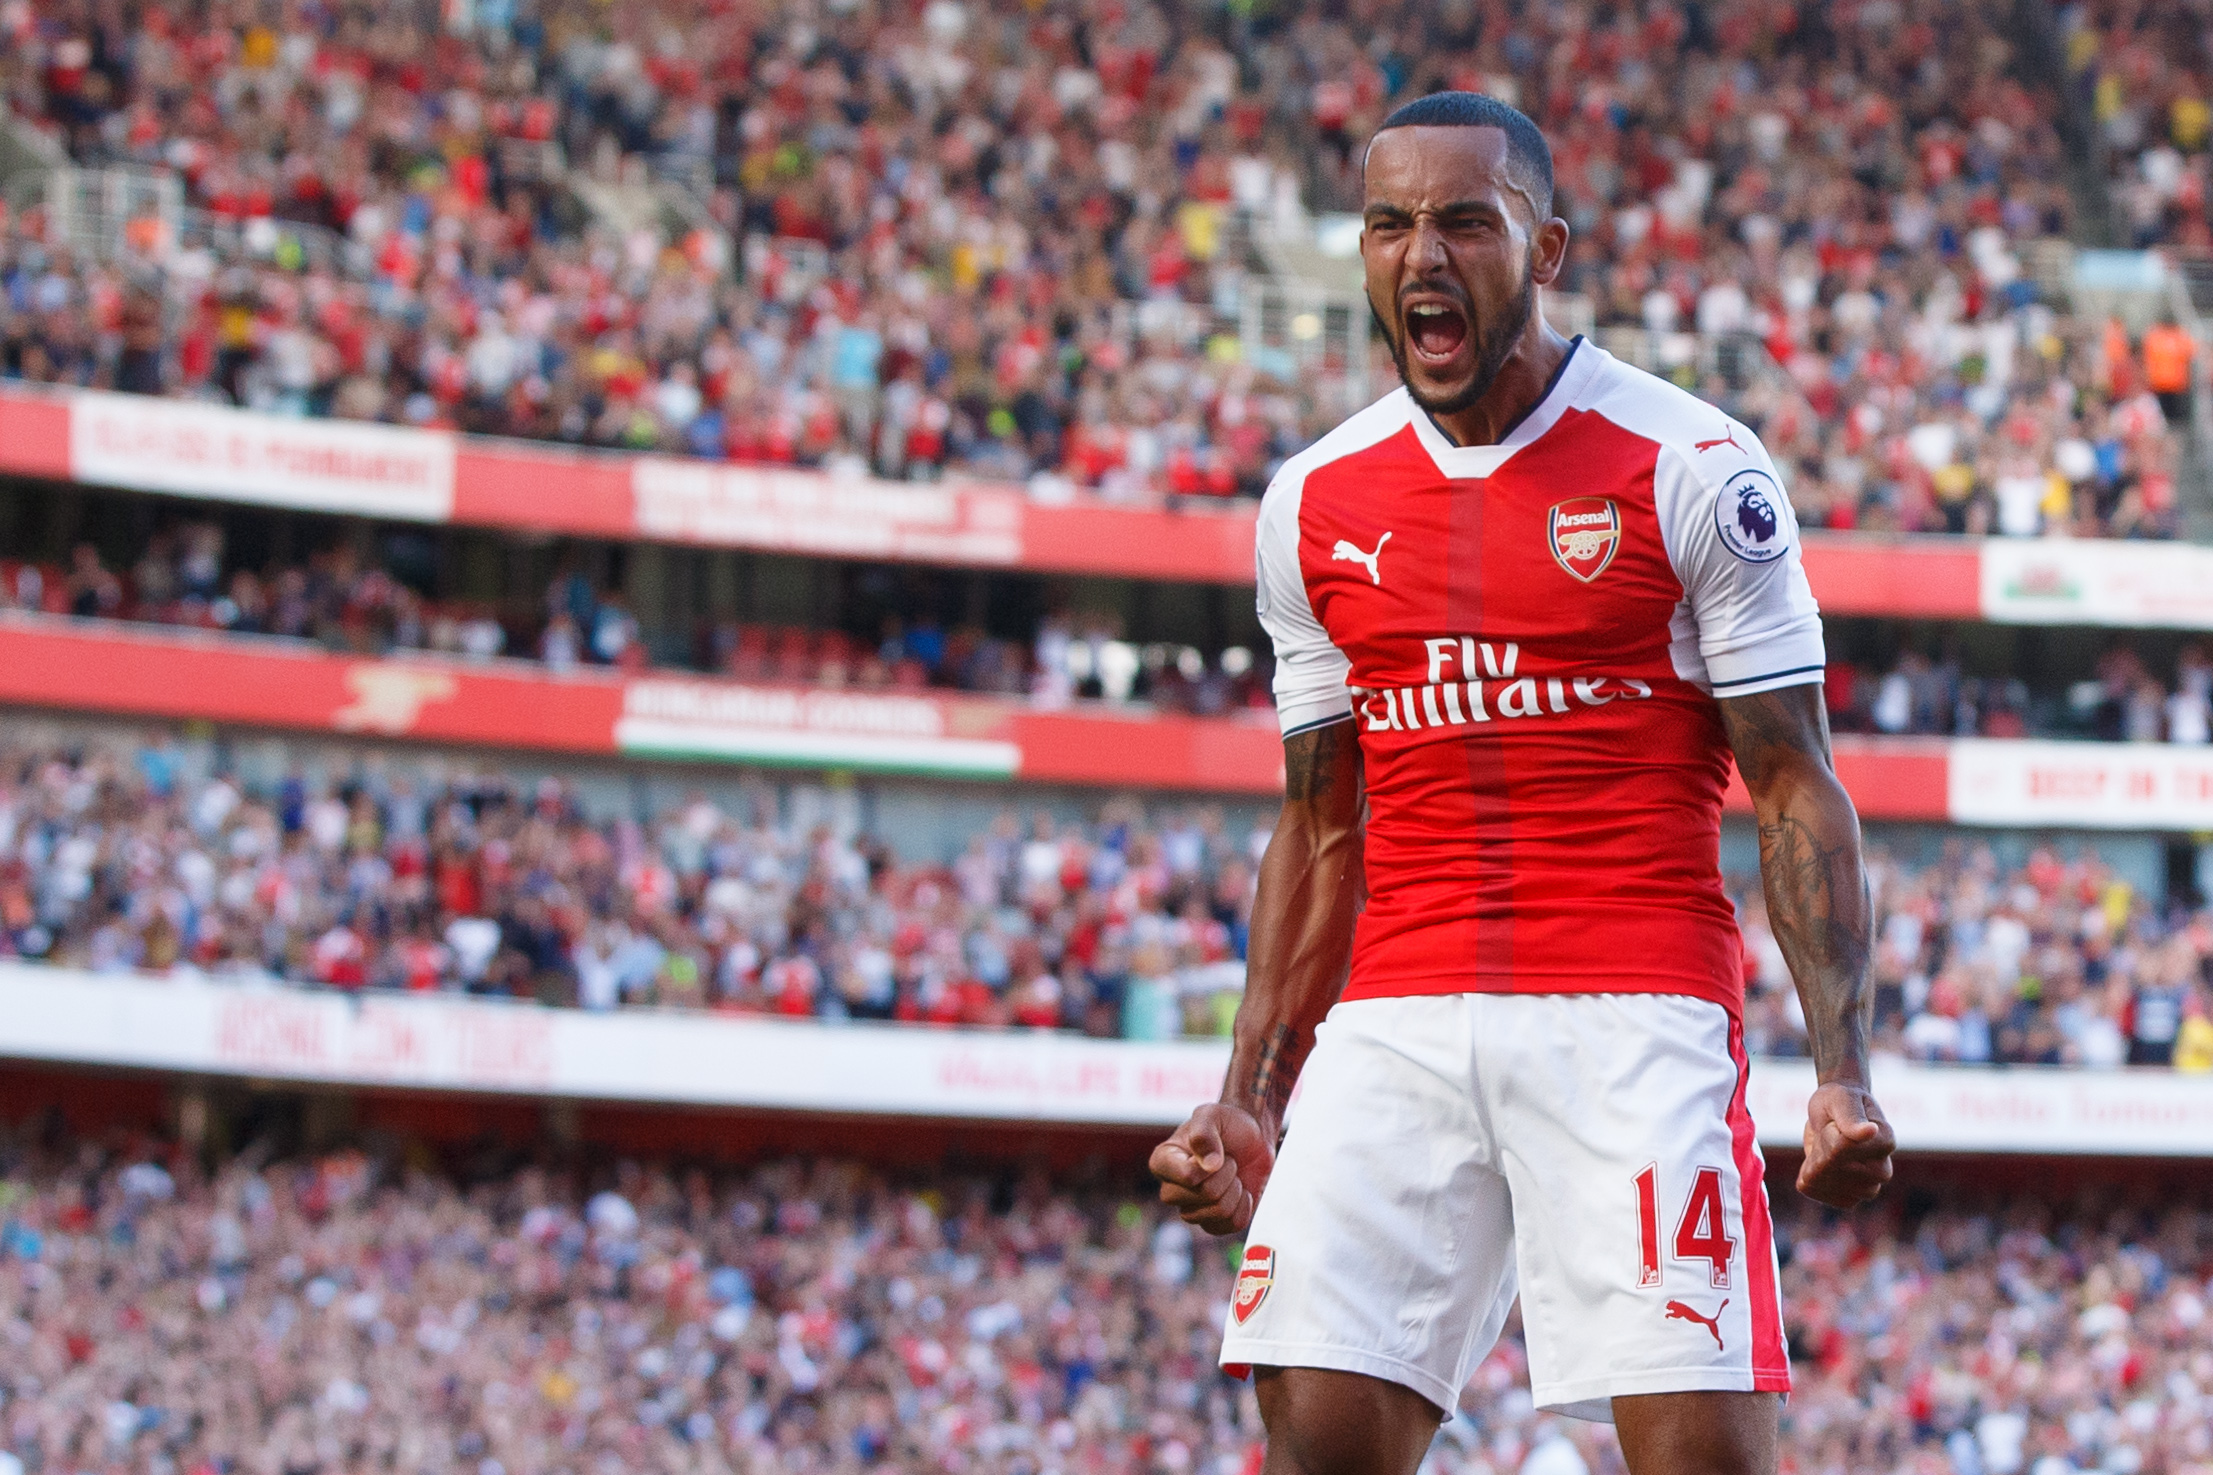 Theo Walcott of Arsenal celebrates scoring a goal after making it 1-0 during the Premier League match between Arsenal and Liverpool played at The Emirates Stadium, London on 14th August 2016 Photo : Queenborough / Bpi / Icon Sport *** Local Caption ***